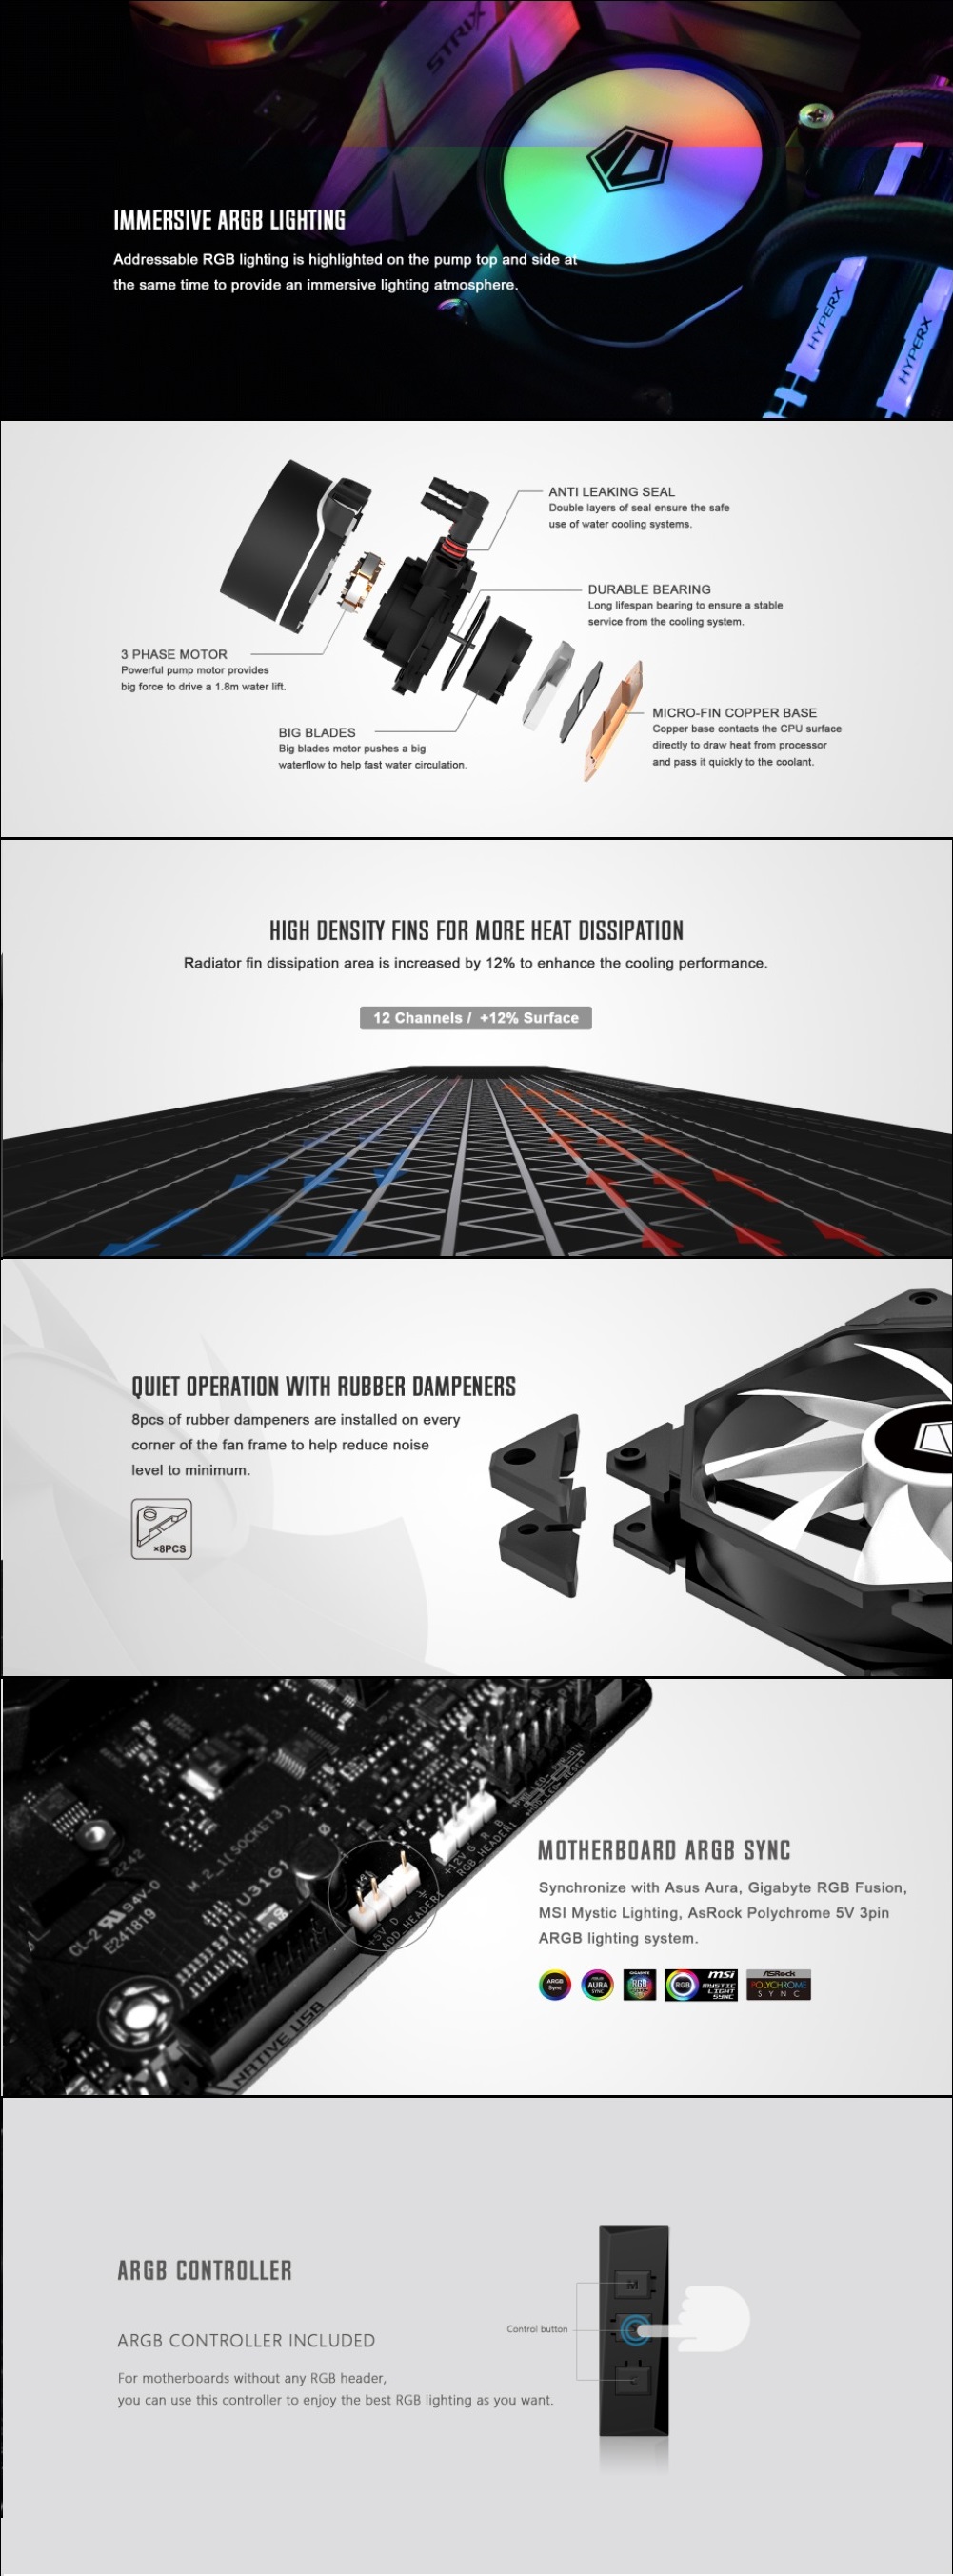 A large marketing image providing additional information about the product ID-COOLING ZoomFlow 240 XT 240mm ARGB AIO CPU Liquid Cooler - Additional alt info not provided